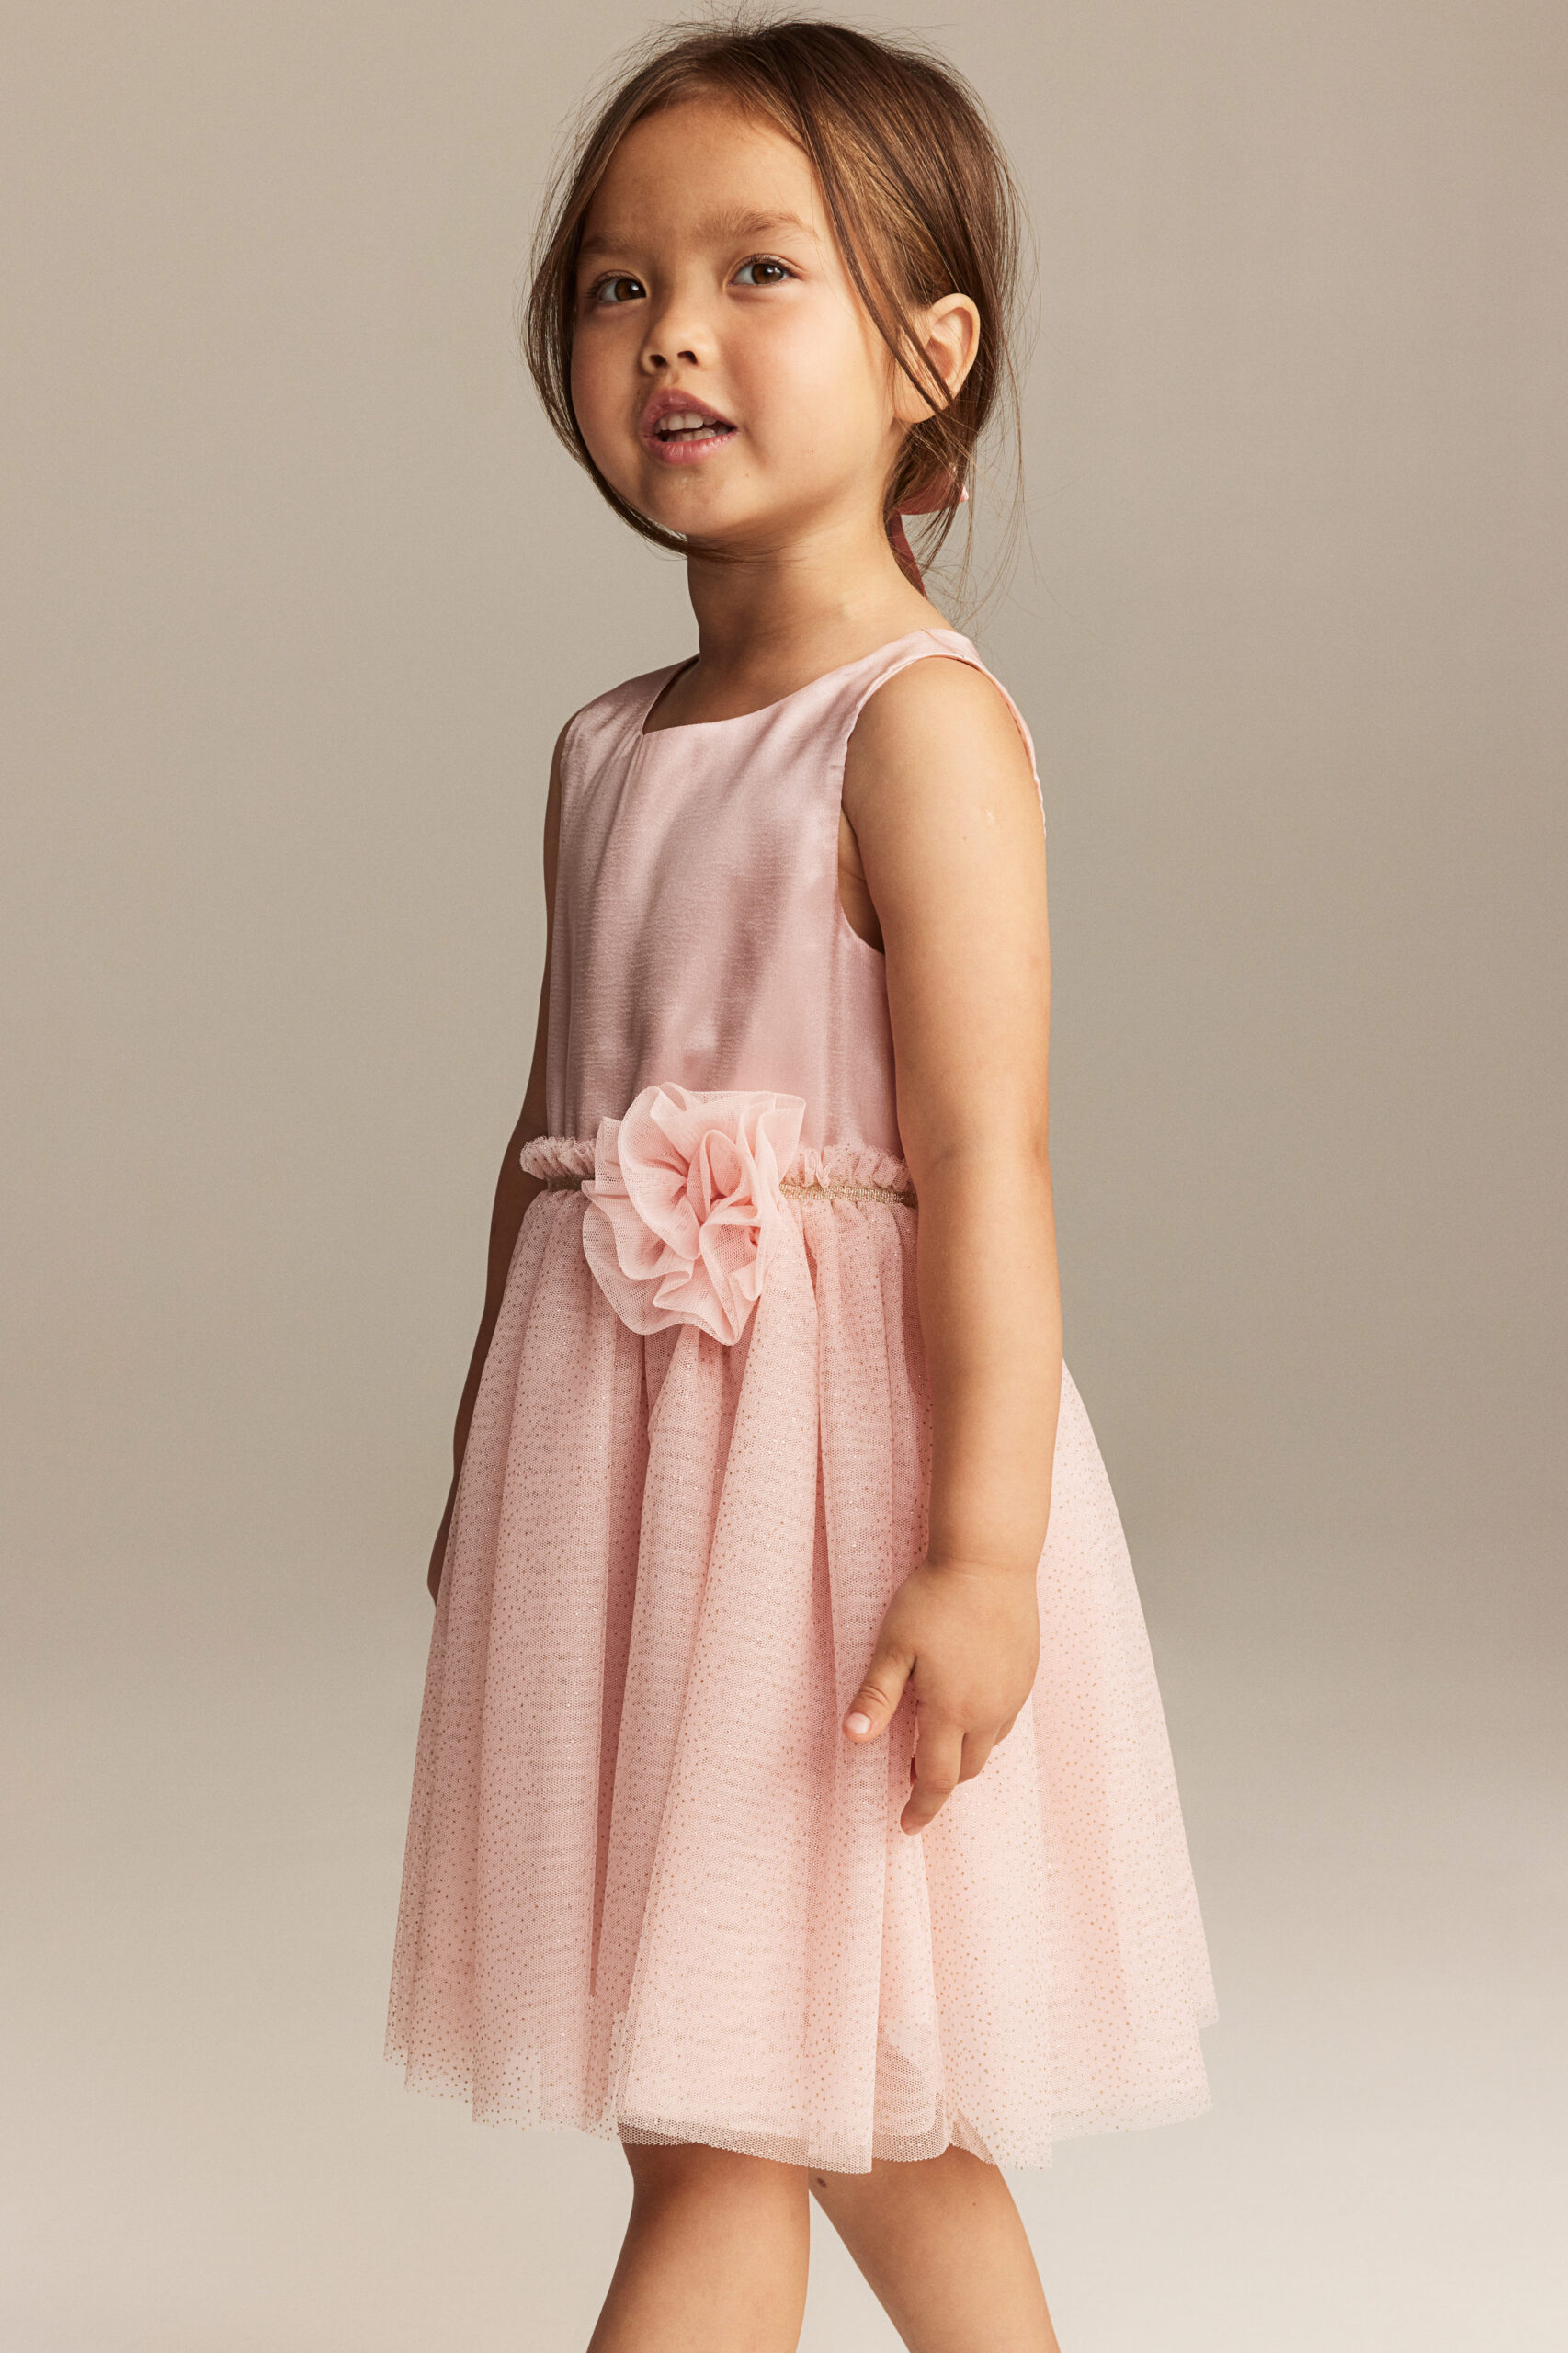 girl wearing pink dress with flower bow